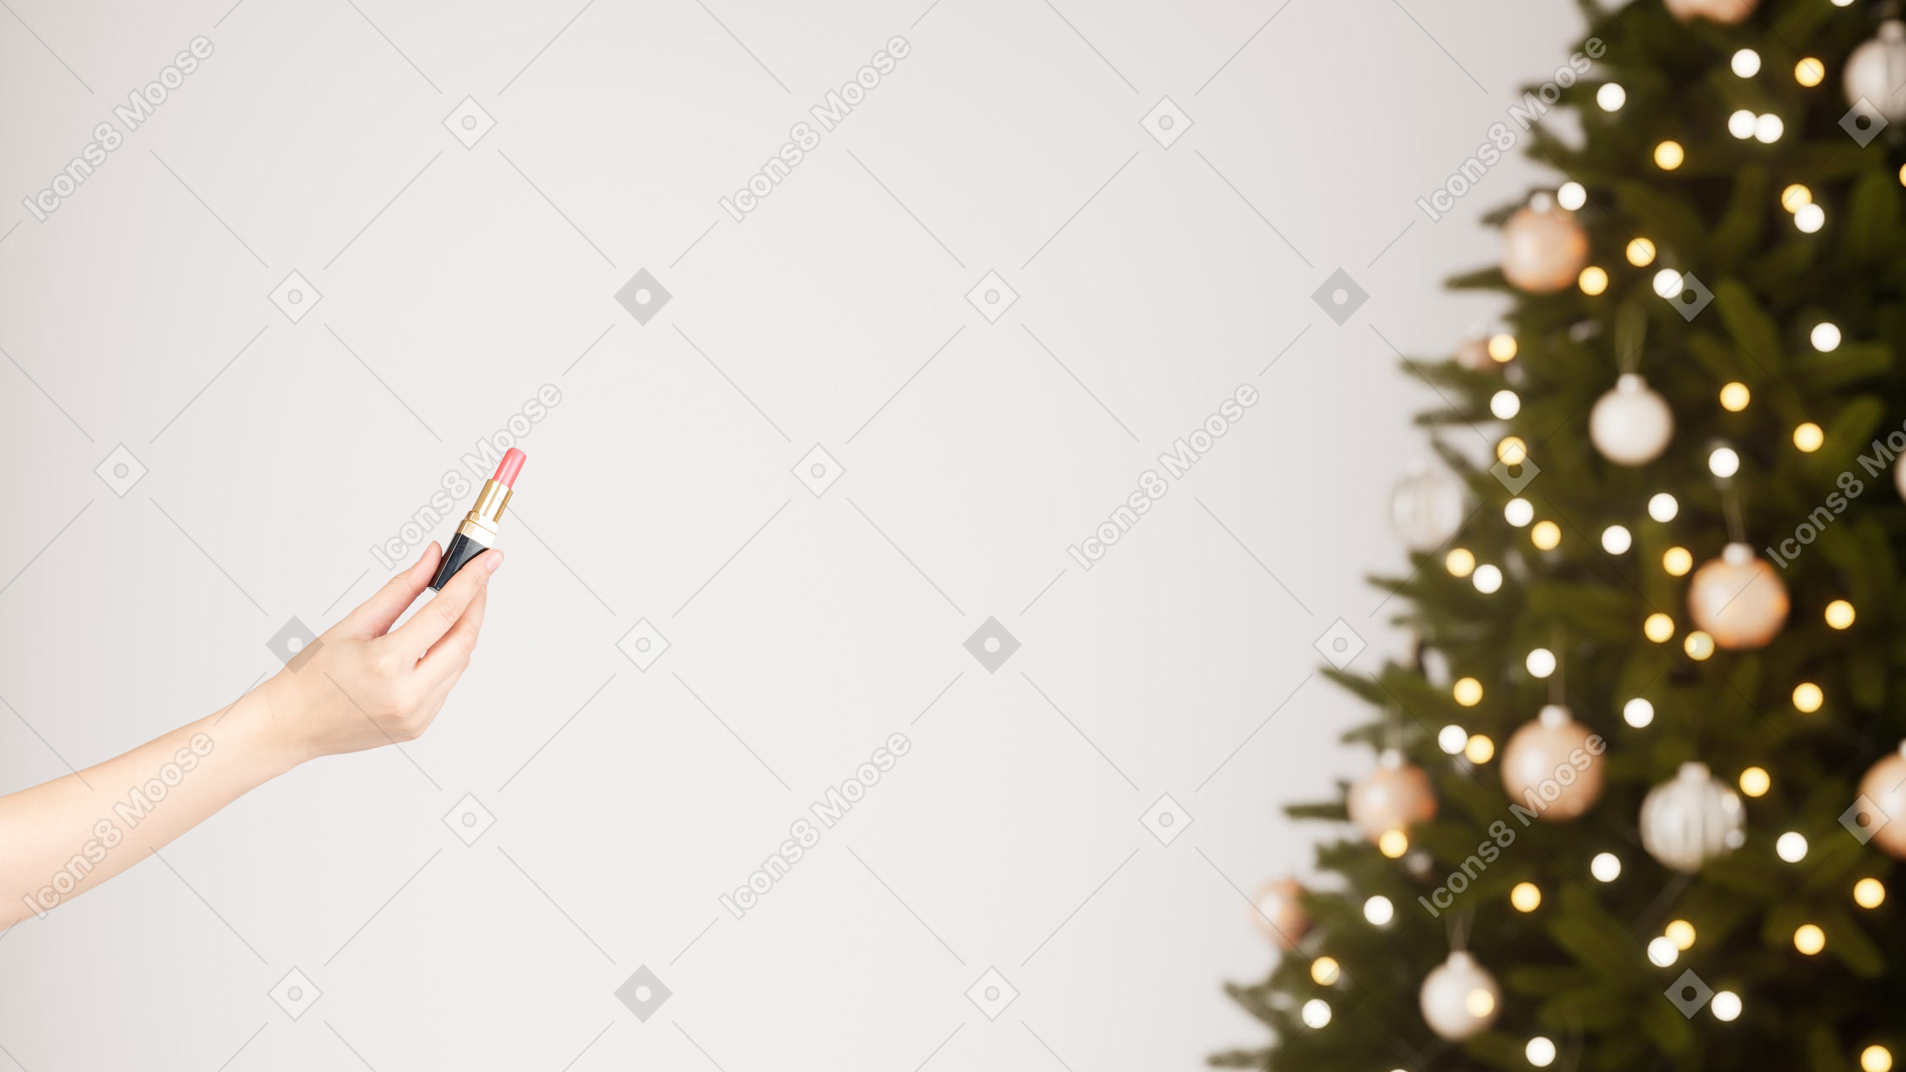 A woman holding a lipstick in front of a christmas tree